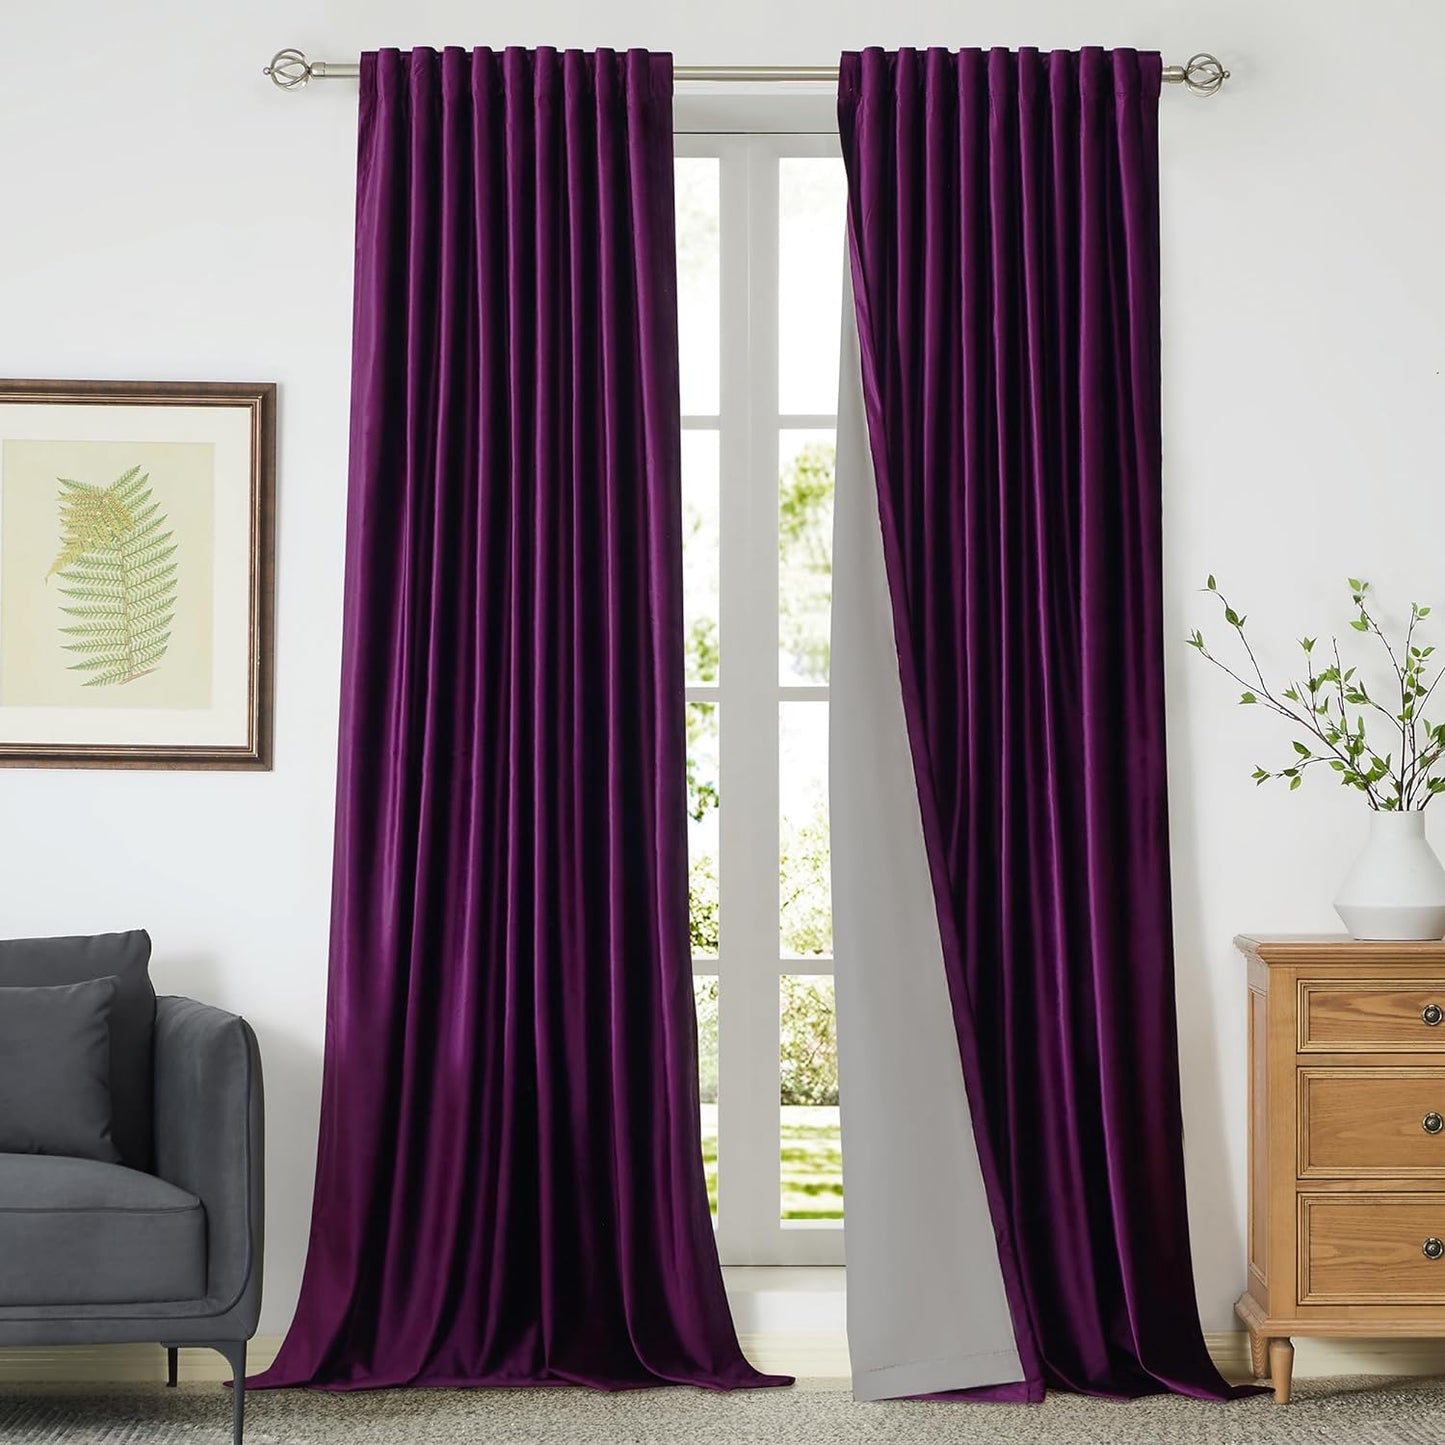 100% Blackout Ivory off White Velvet Curtains 108 Inch Long for Living Room,Set of 2 Panels Liner Rod Pocket Back Tab Thermal Window Drapes Room Darkening Heavy Decorative Curtains for Bedroom  PRIMROSE Purple 52X96 Inches 